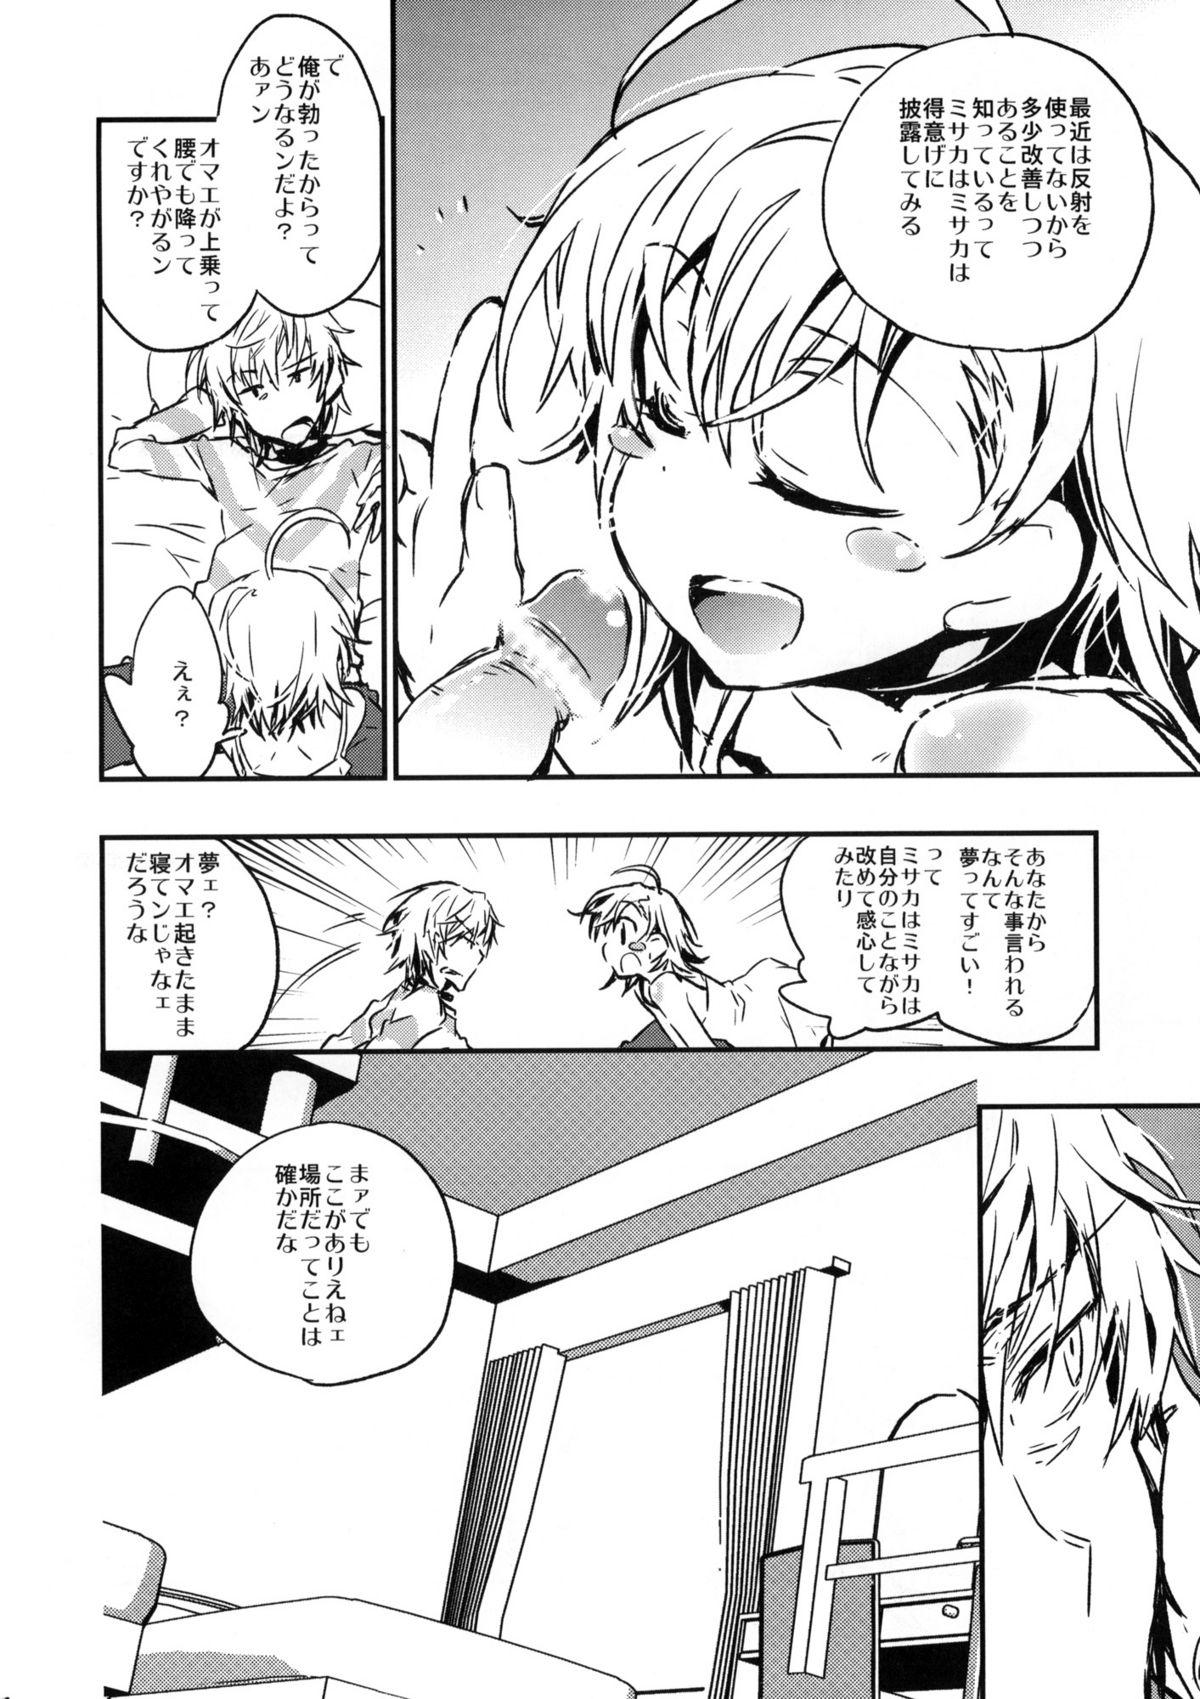 Horny We're part of each other - Toaru majutsu no index Toilet - Page 5